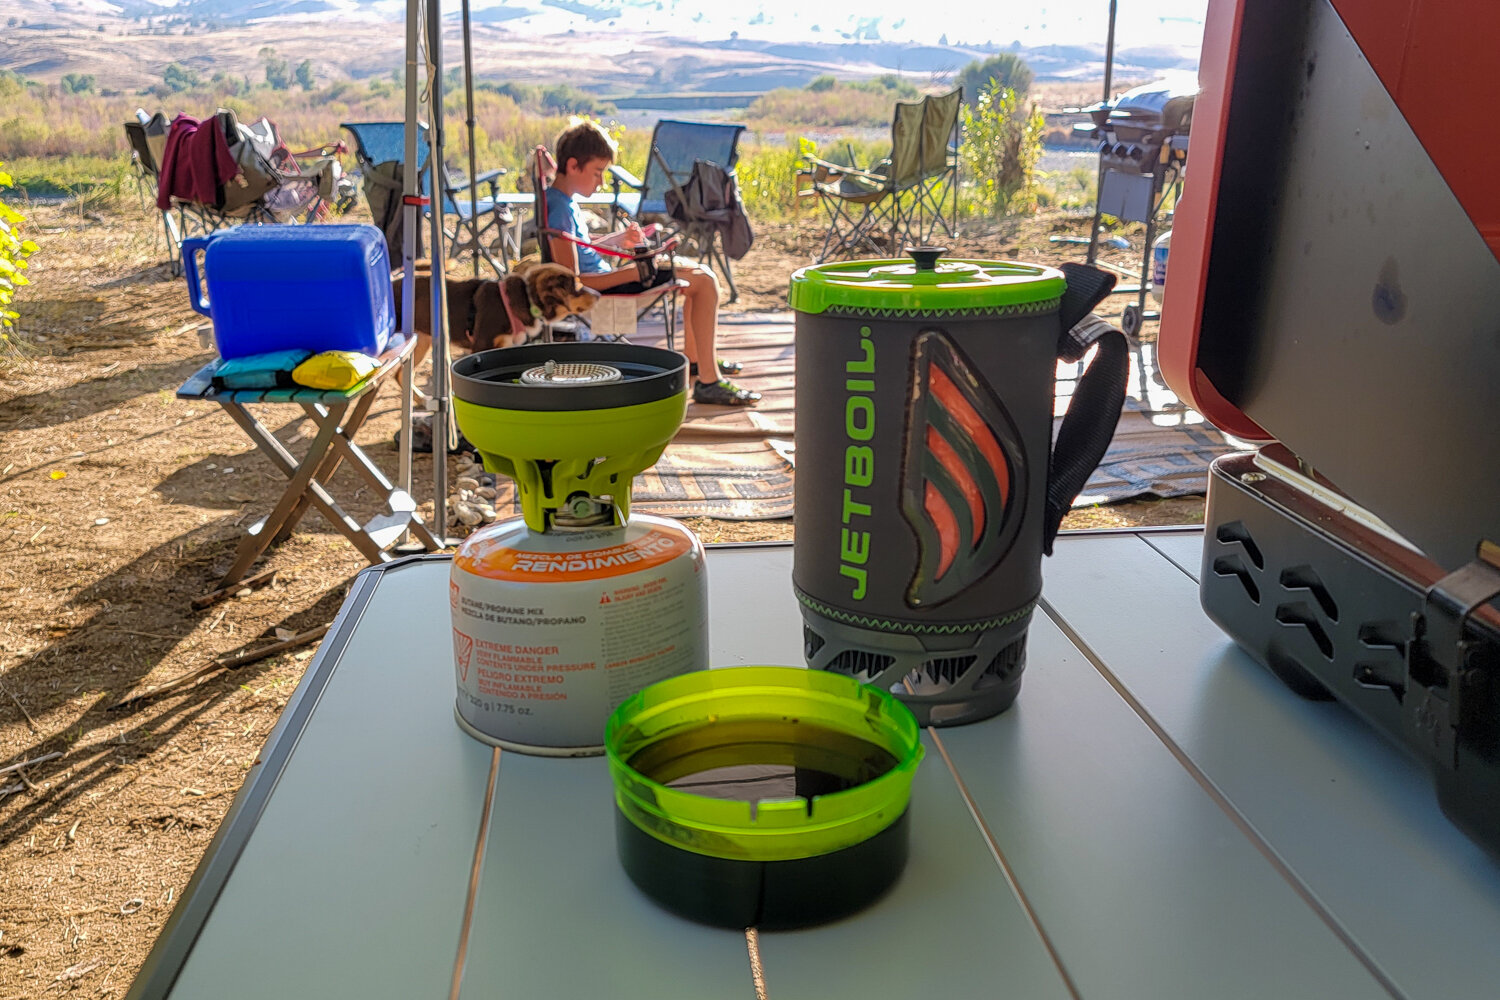 The Jetboil Flash & Flash Java Kit make hot water & coffee instantly - wherever you are